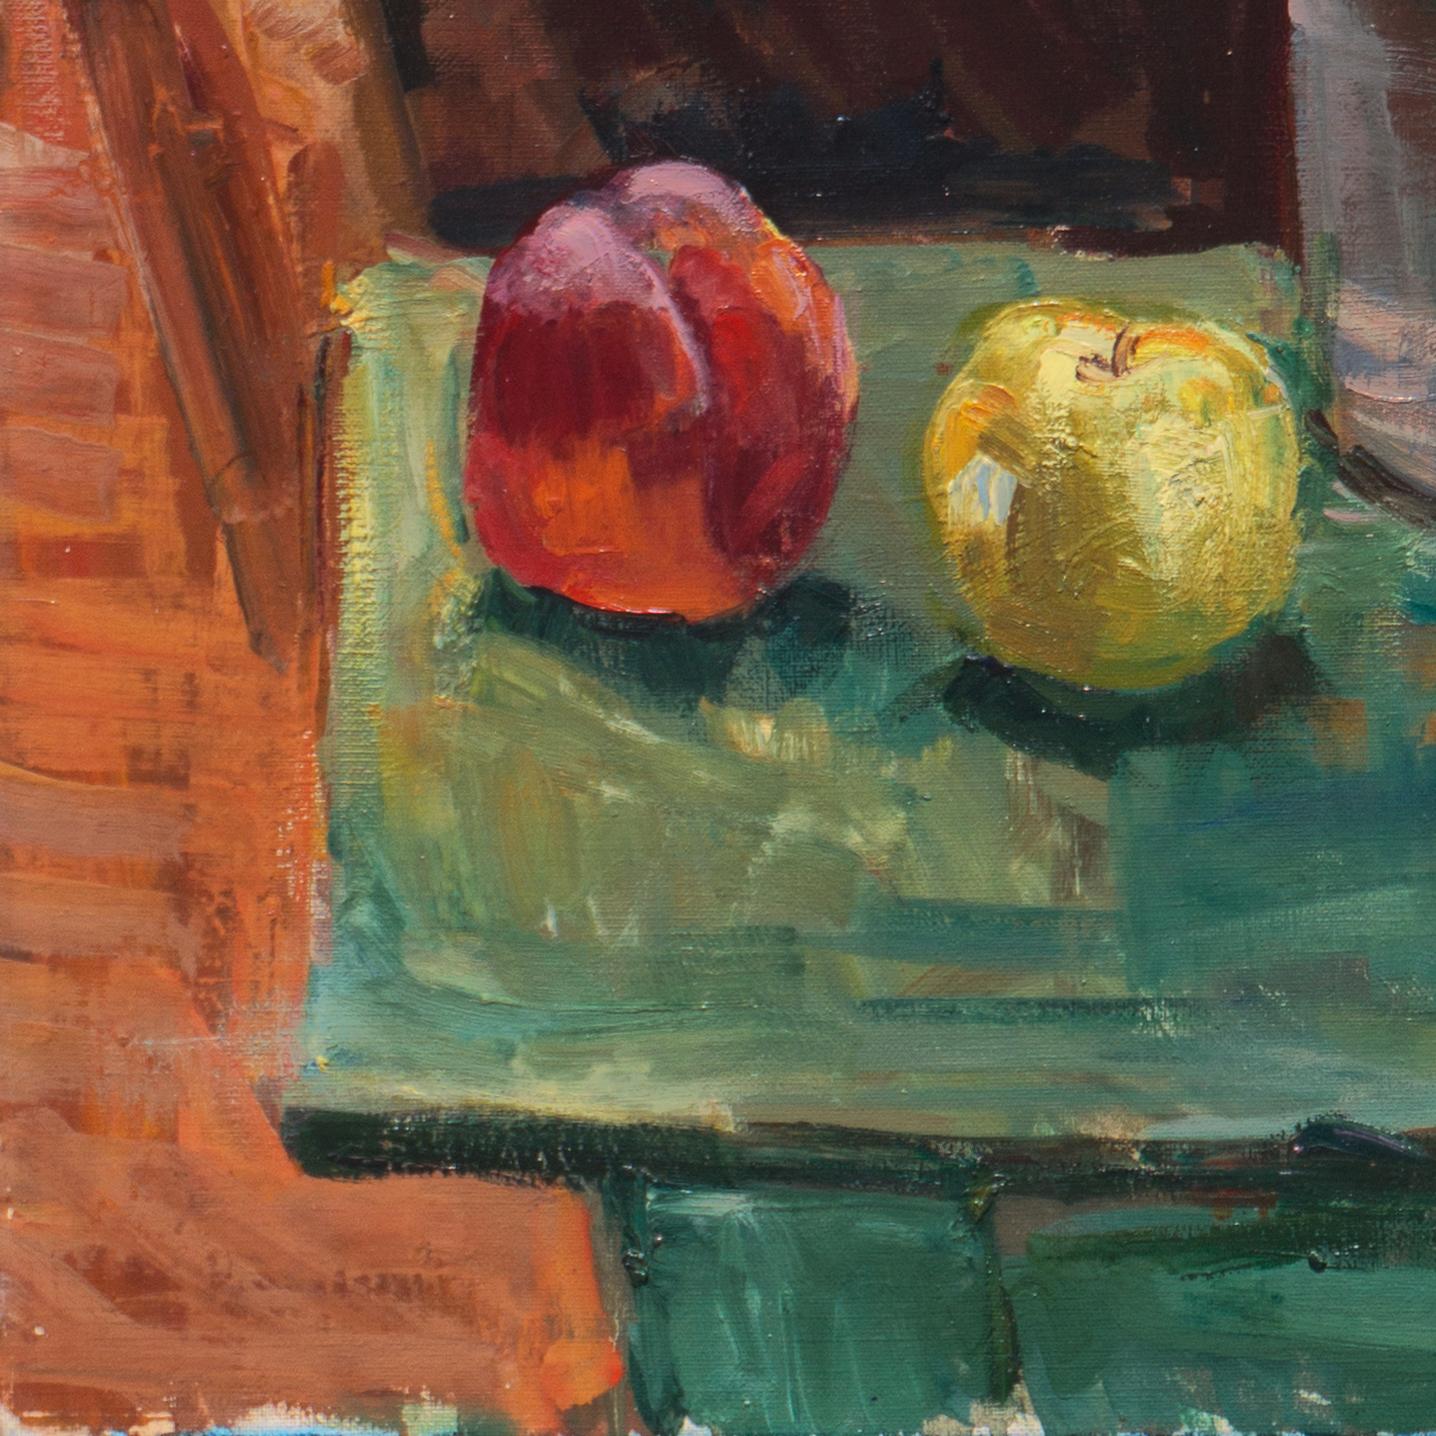 'Peaches, Apples and Roses', Paris, Royal Danish Academy, Charlottenborg Gallery - Post-Impressionist Painting by Mogens Erik Christien Vantore